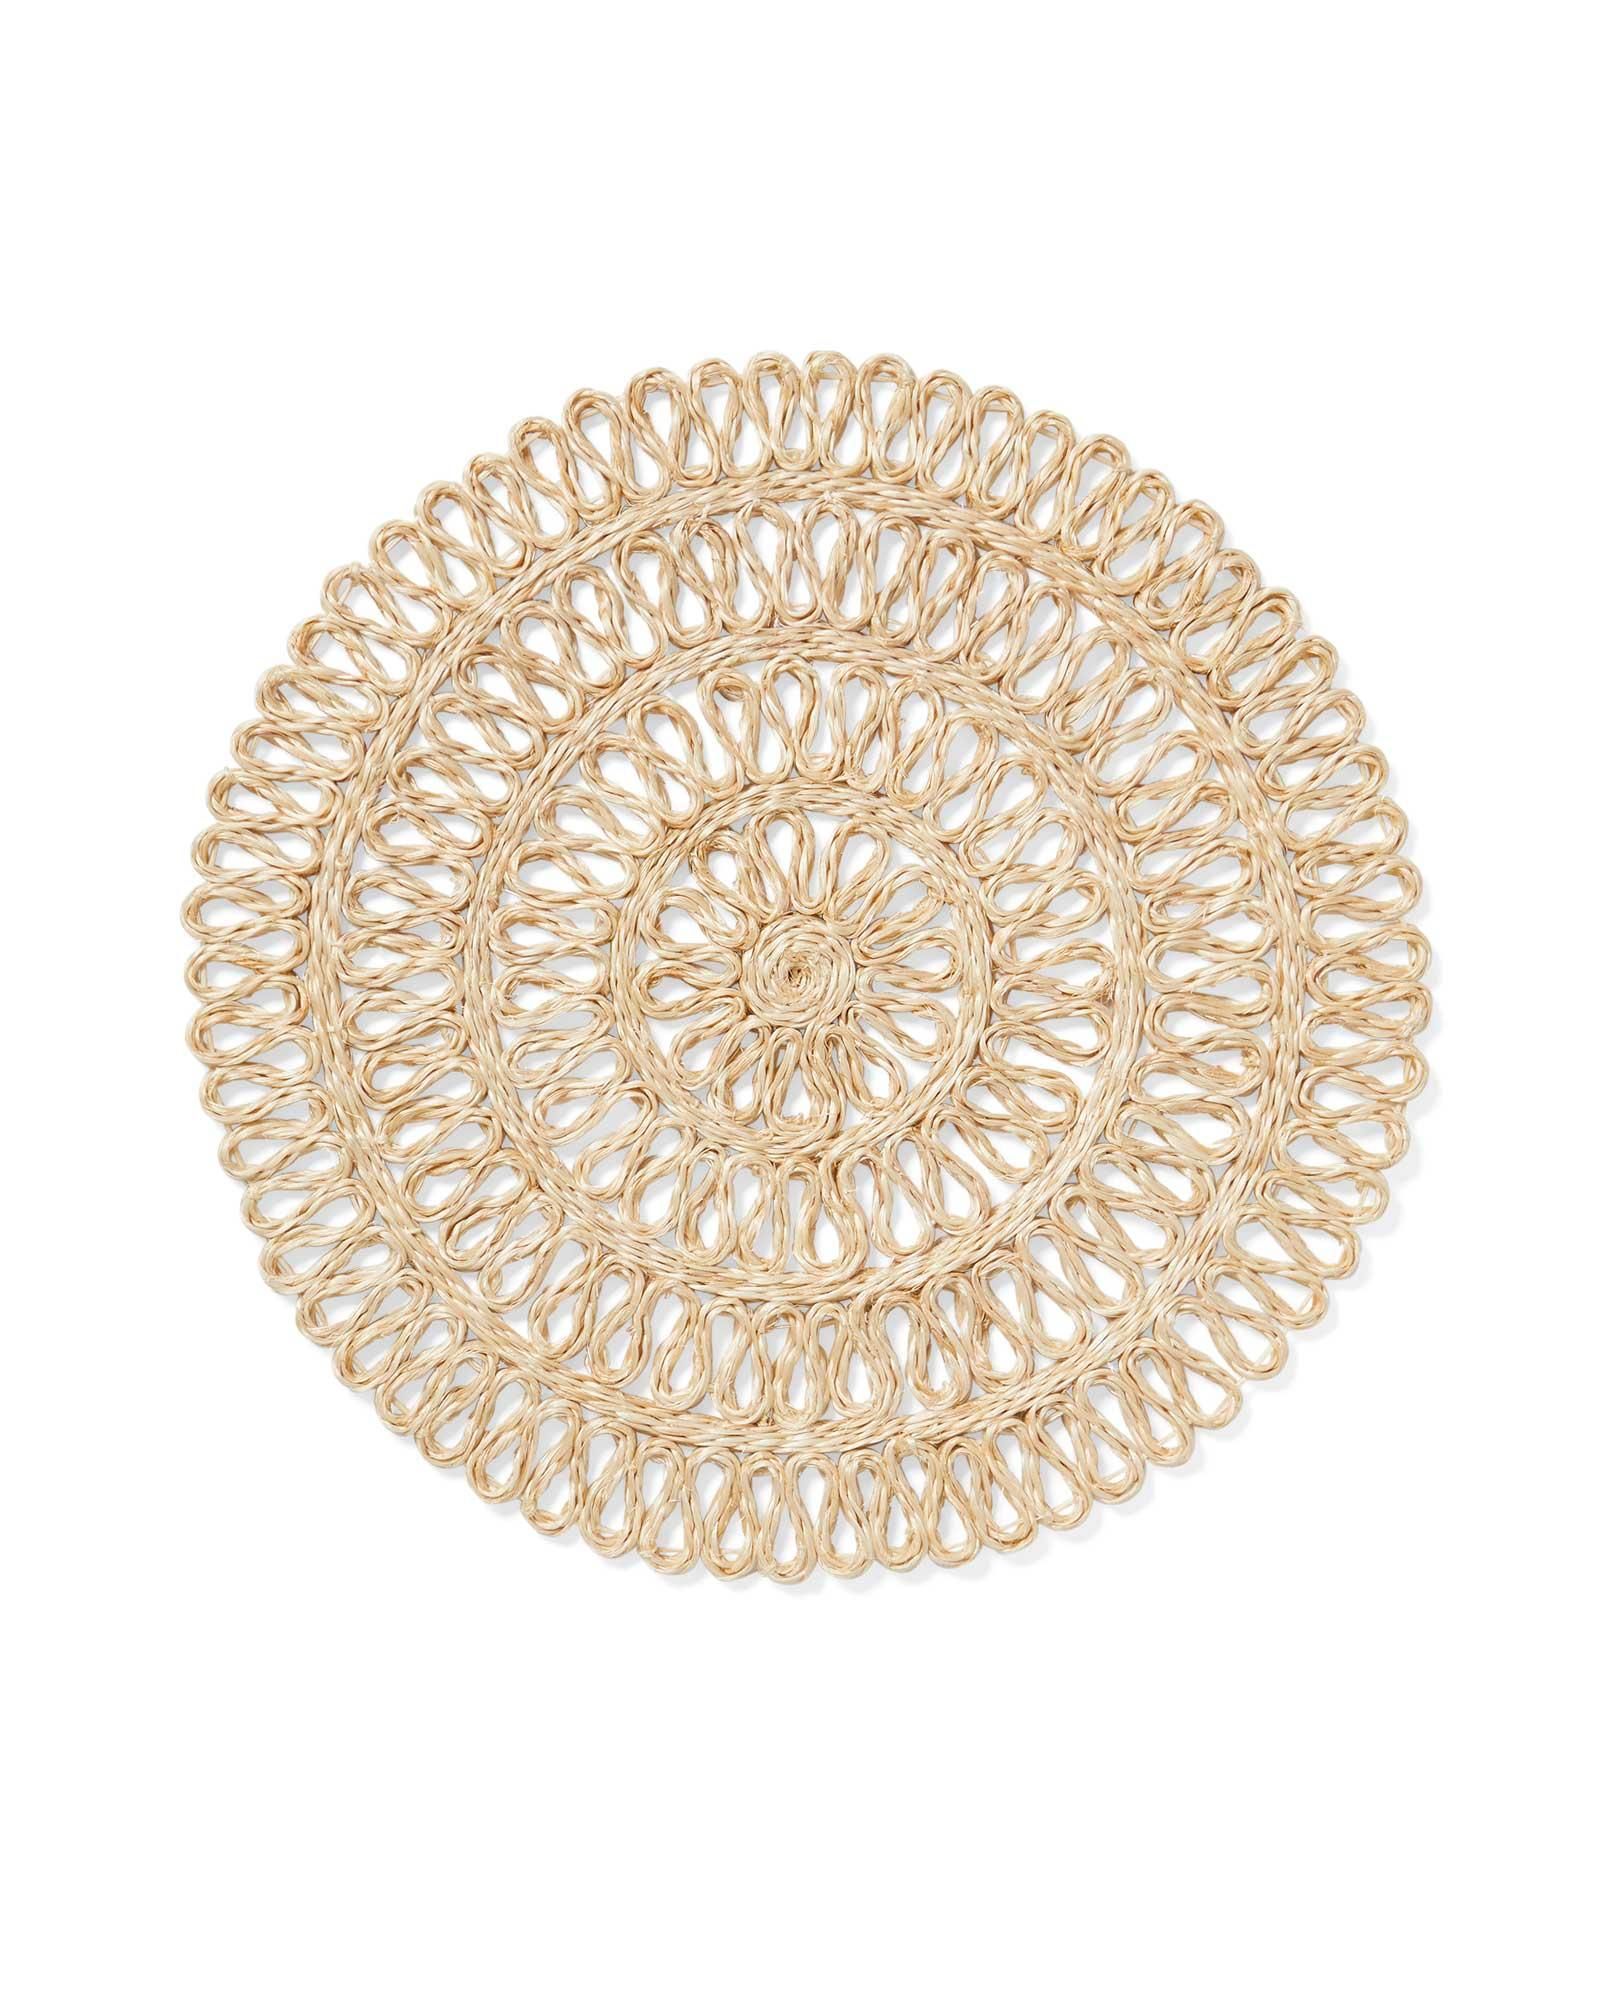 Minorca Placemat (Set of 4) | Serena and Lily